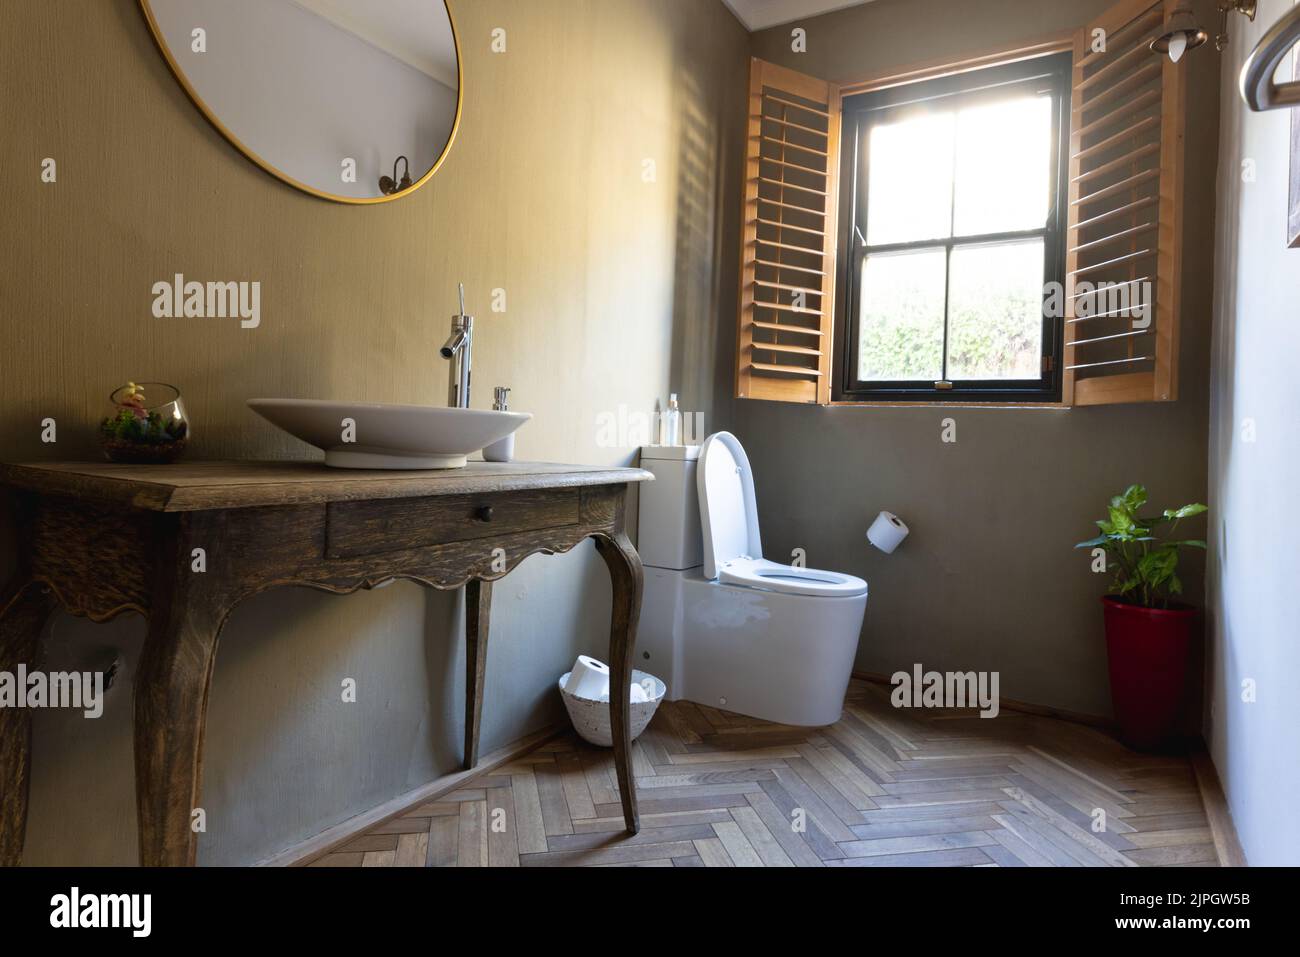 General view of luxury interior of bathroom with toilet and washbasin Stock Photo